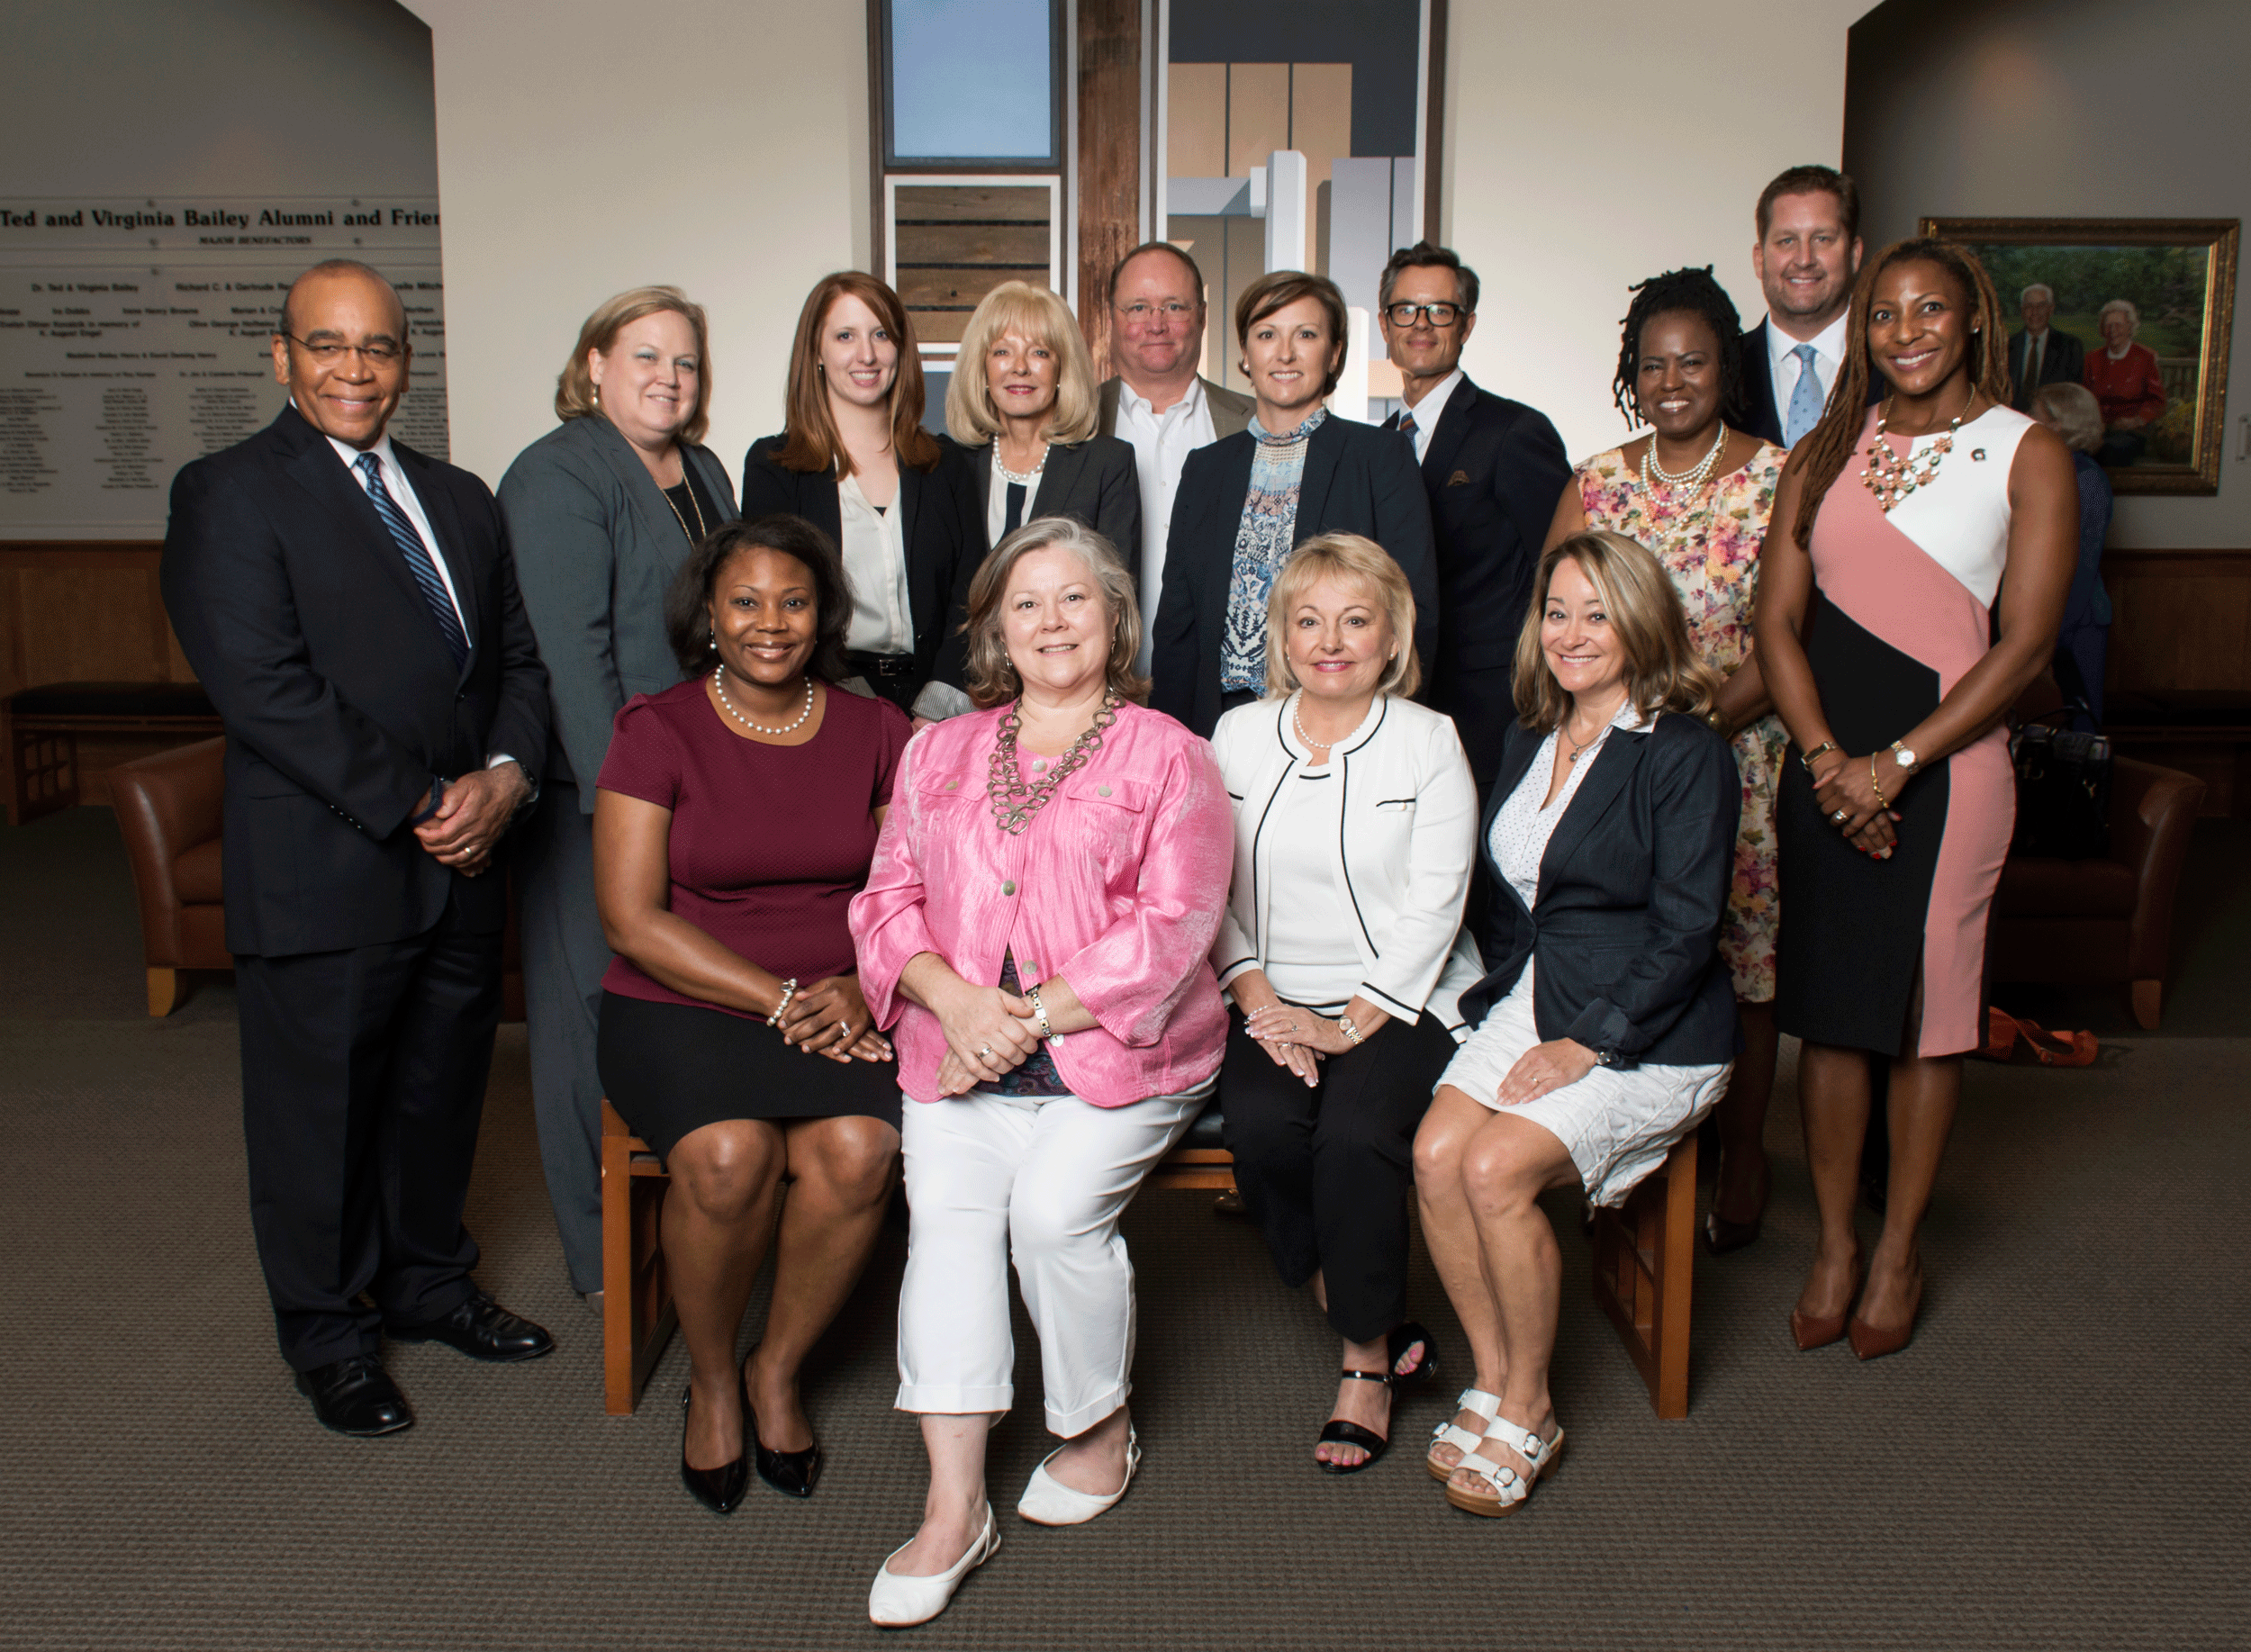 The UALR Alumni Board of Directors, from left to right, include: Back Row: James Bobo, Pamela Lamb, Danielle Hendrix, Becky Blass, Herb Wright, Holly Rose, Graham Cobb, Helaine Williams, Doug Homeyer, and Kristi Smith. Front Row: Katrina Owoh, Stephanie Caruthers, Mauri Douglass, and Gina Pharis. Not all of the board members appear in this photo. Photo by Lonnie Timmons III/UALR Communications.